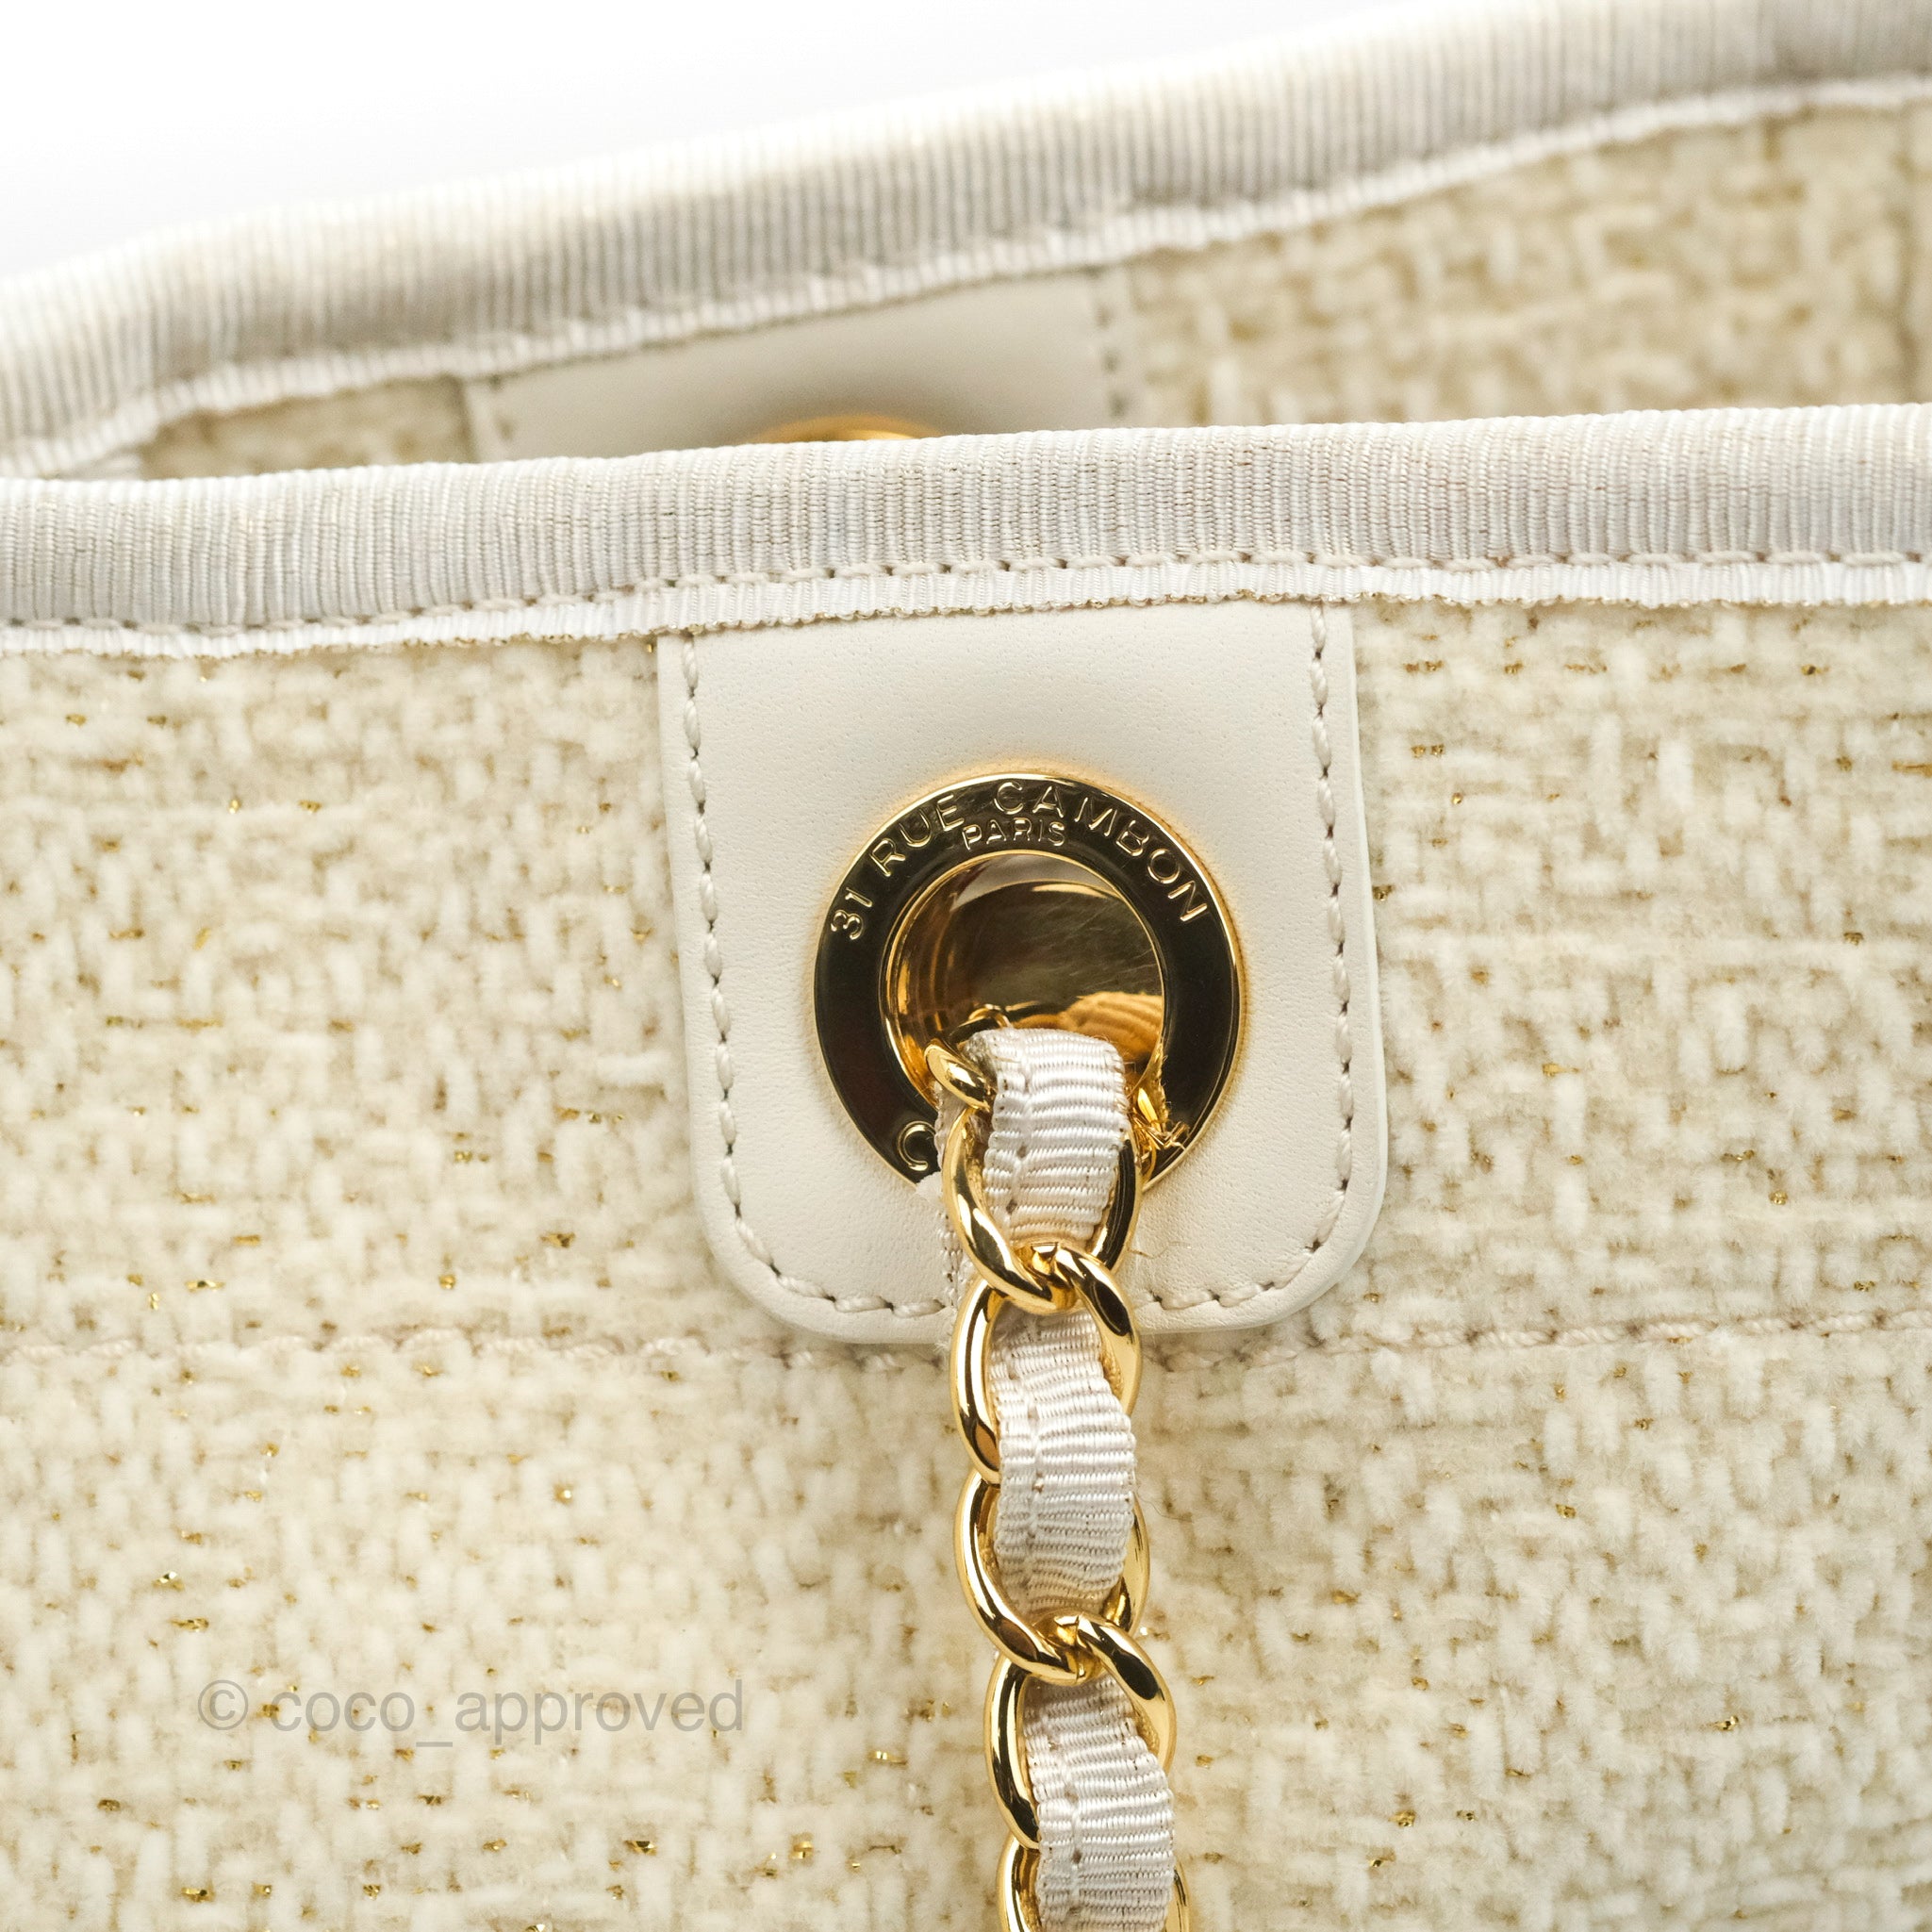 Chanel Medium Deauville Tote Ivory Lurex Boucle 19A – Coco Approved Studio